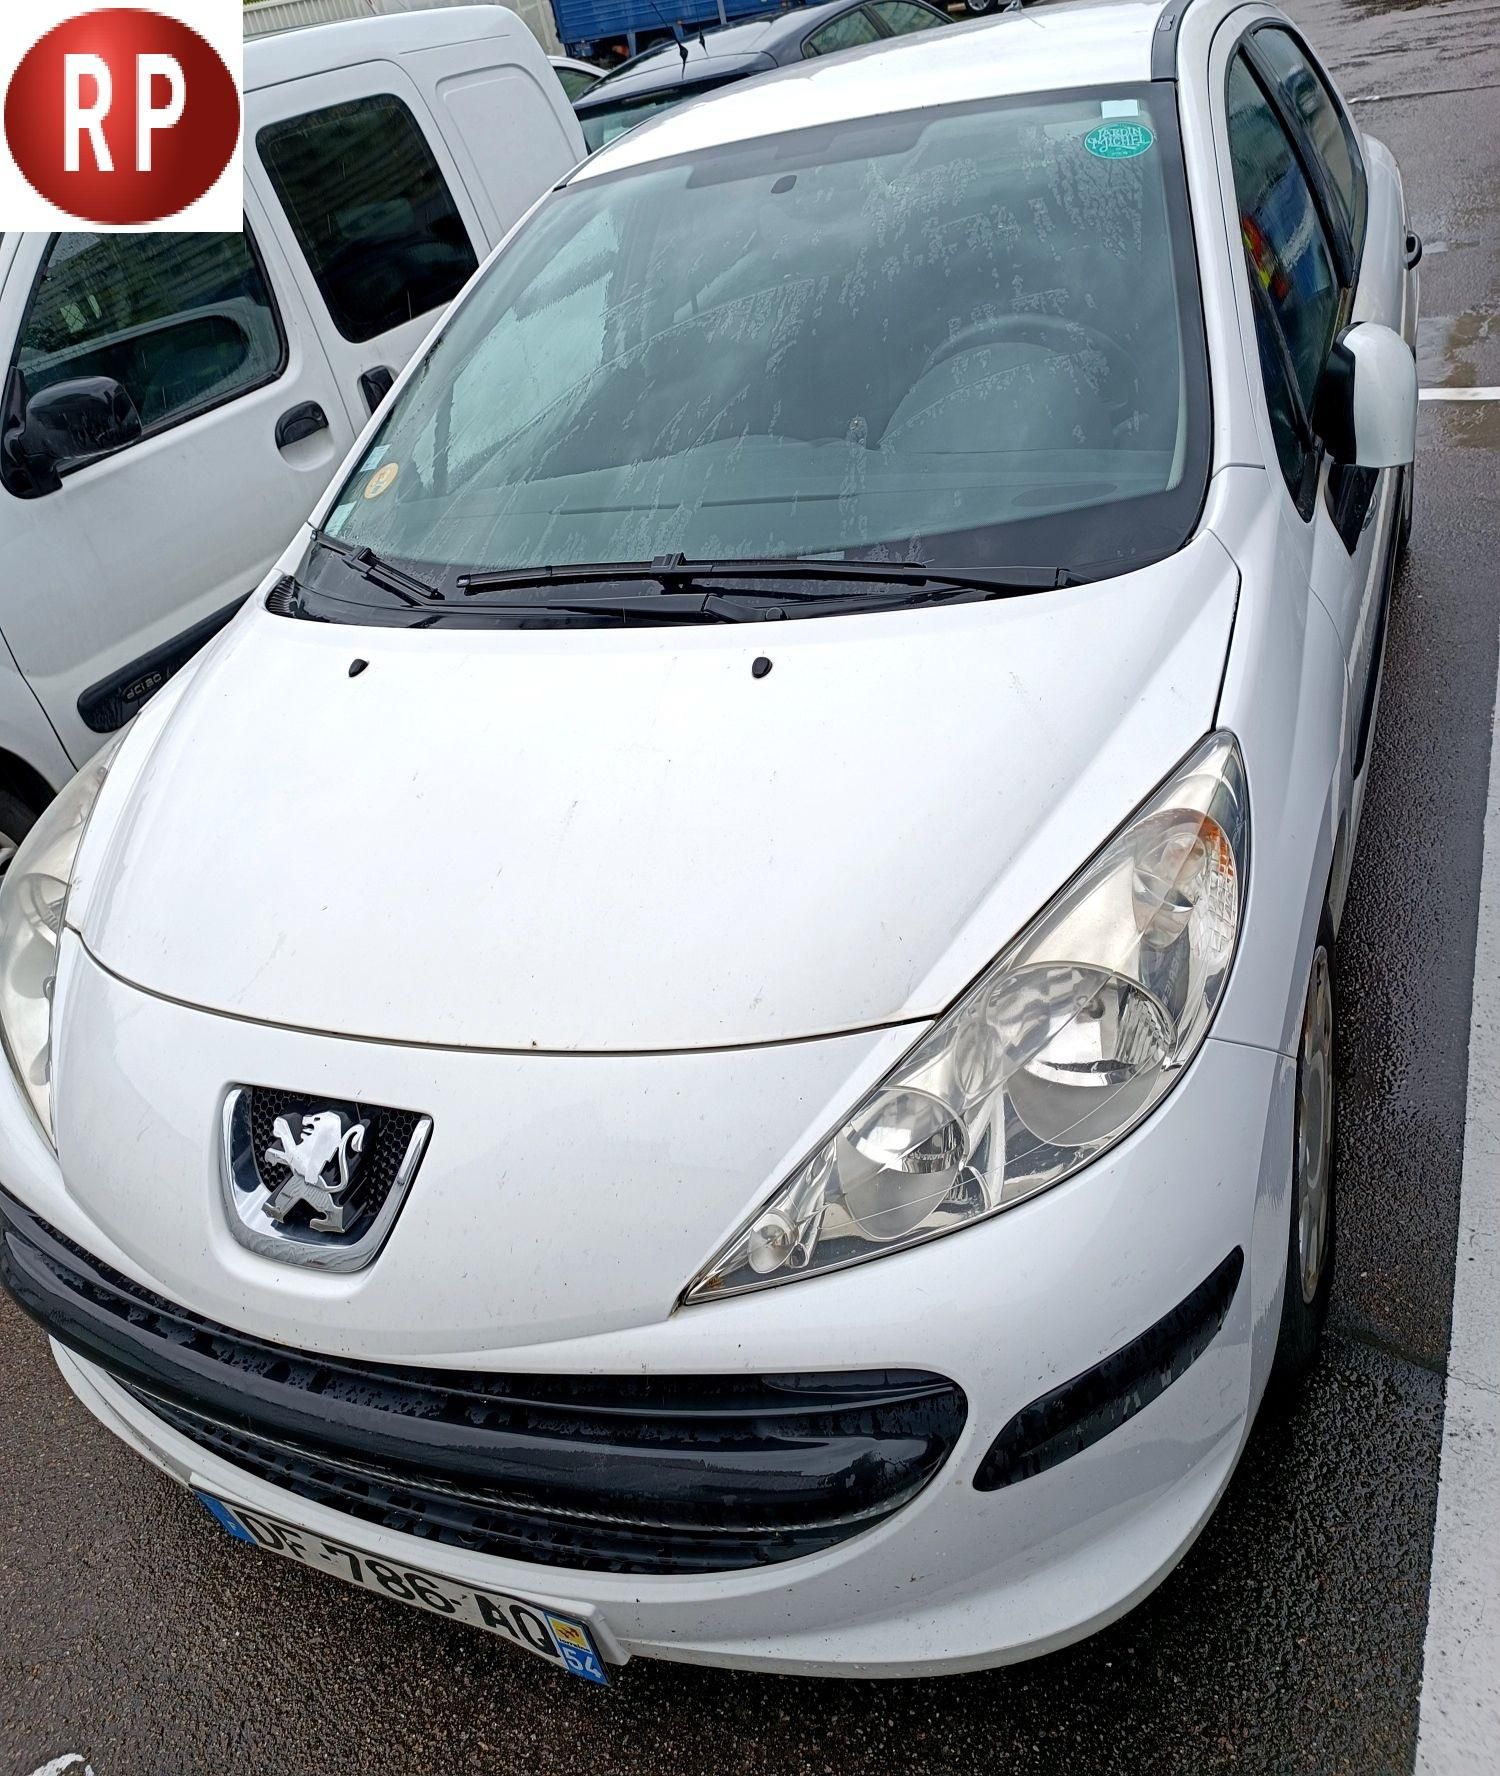 Null [RP] 
[Reserved for vehicle professionals] PEUGEOT 207 5 doors 1.4 HDi 70 h&hellip;